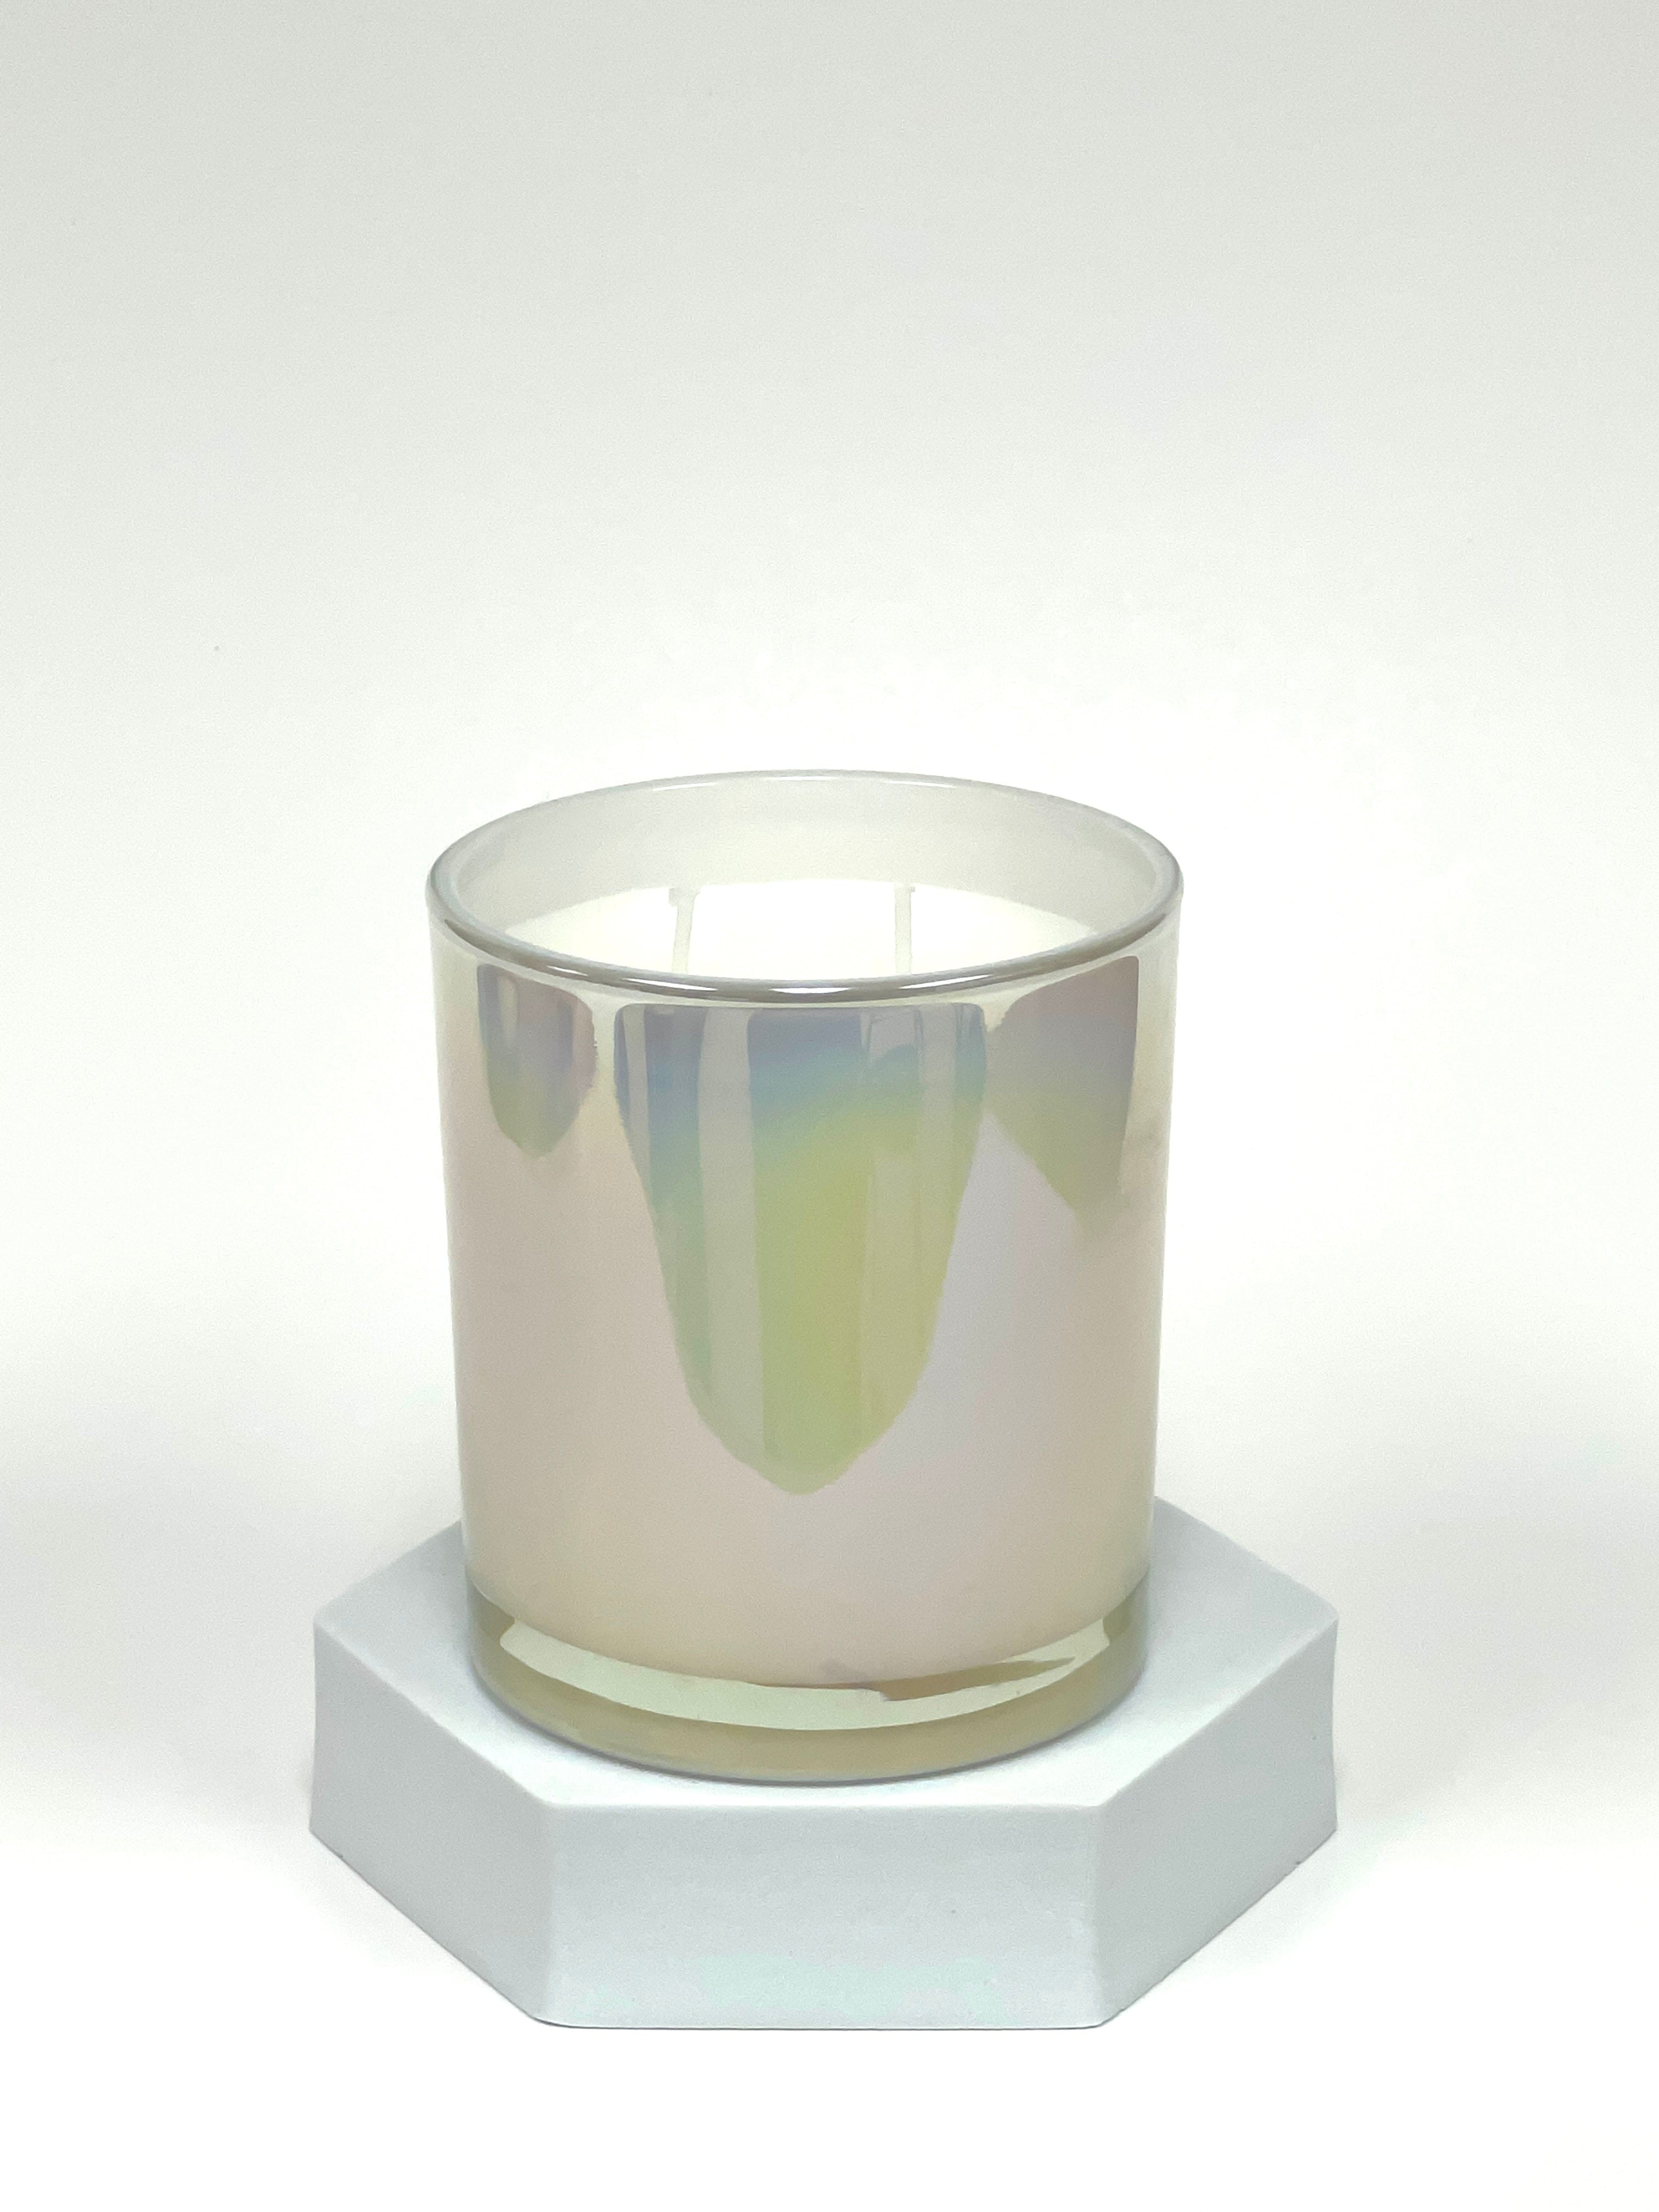 Iridescent Vessels Private Label Candles (12 Candles)